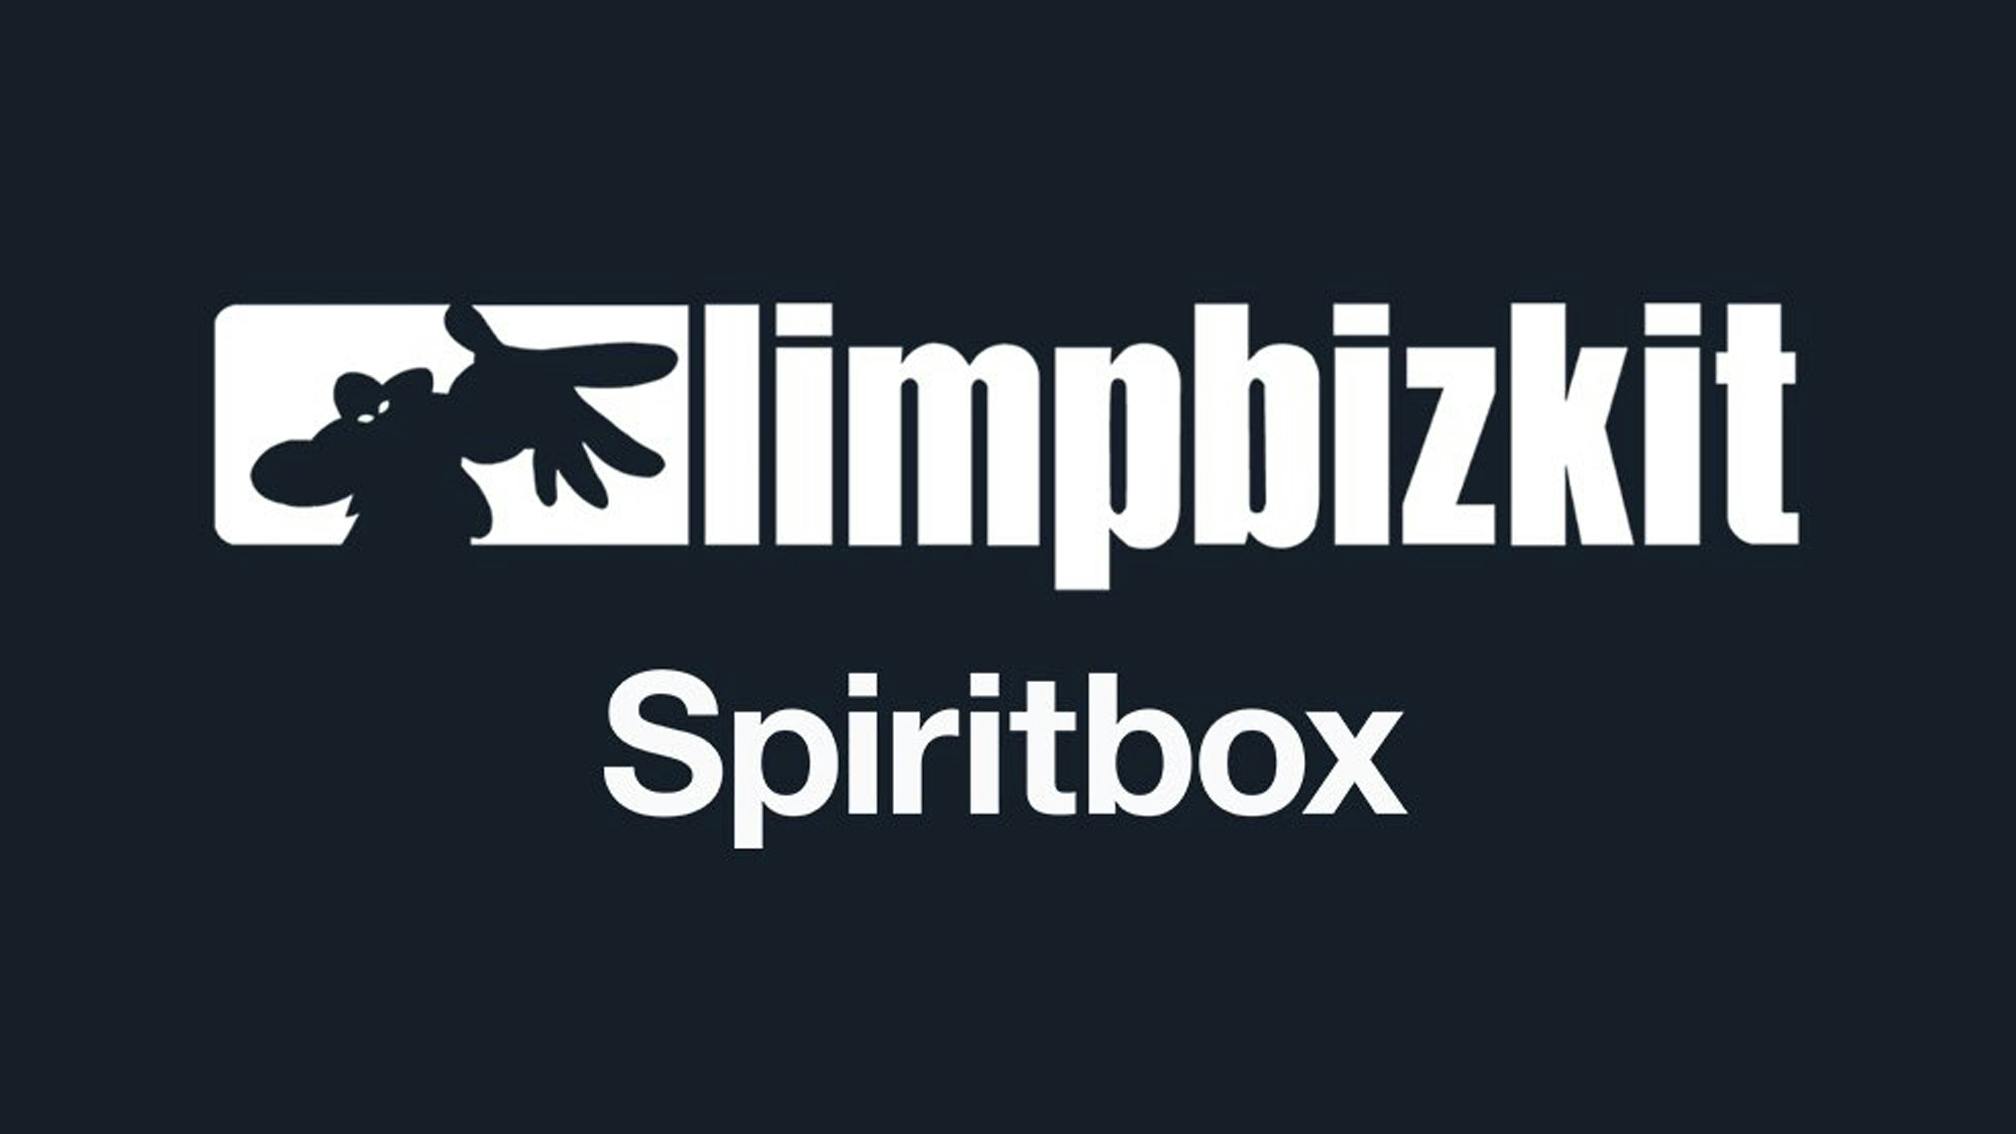 Limp Bizkit and Spiritbox are going on tour together soon